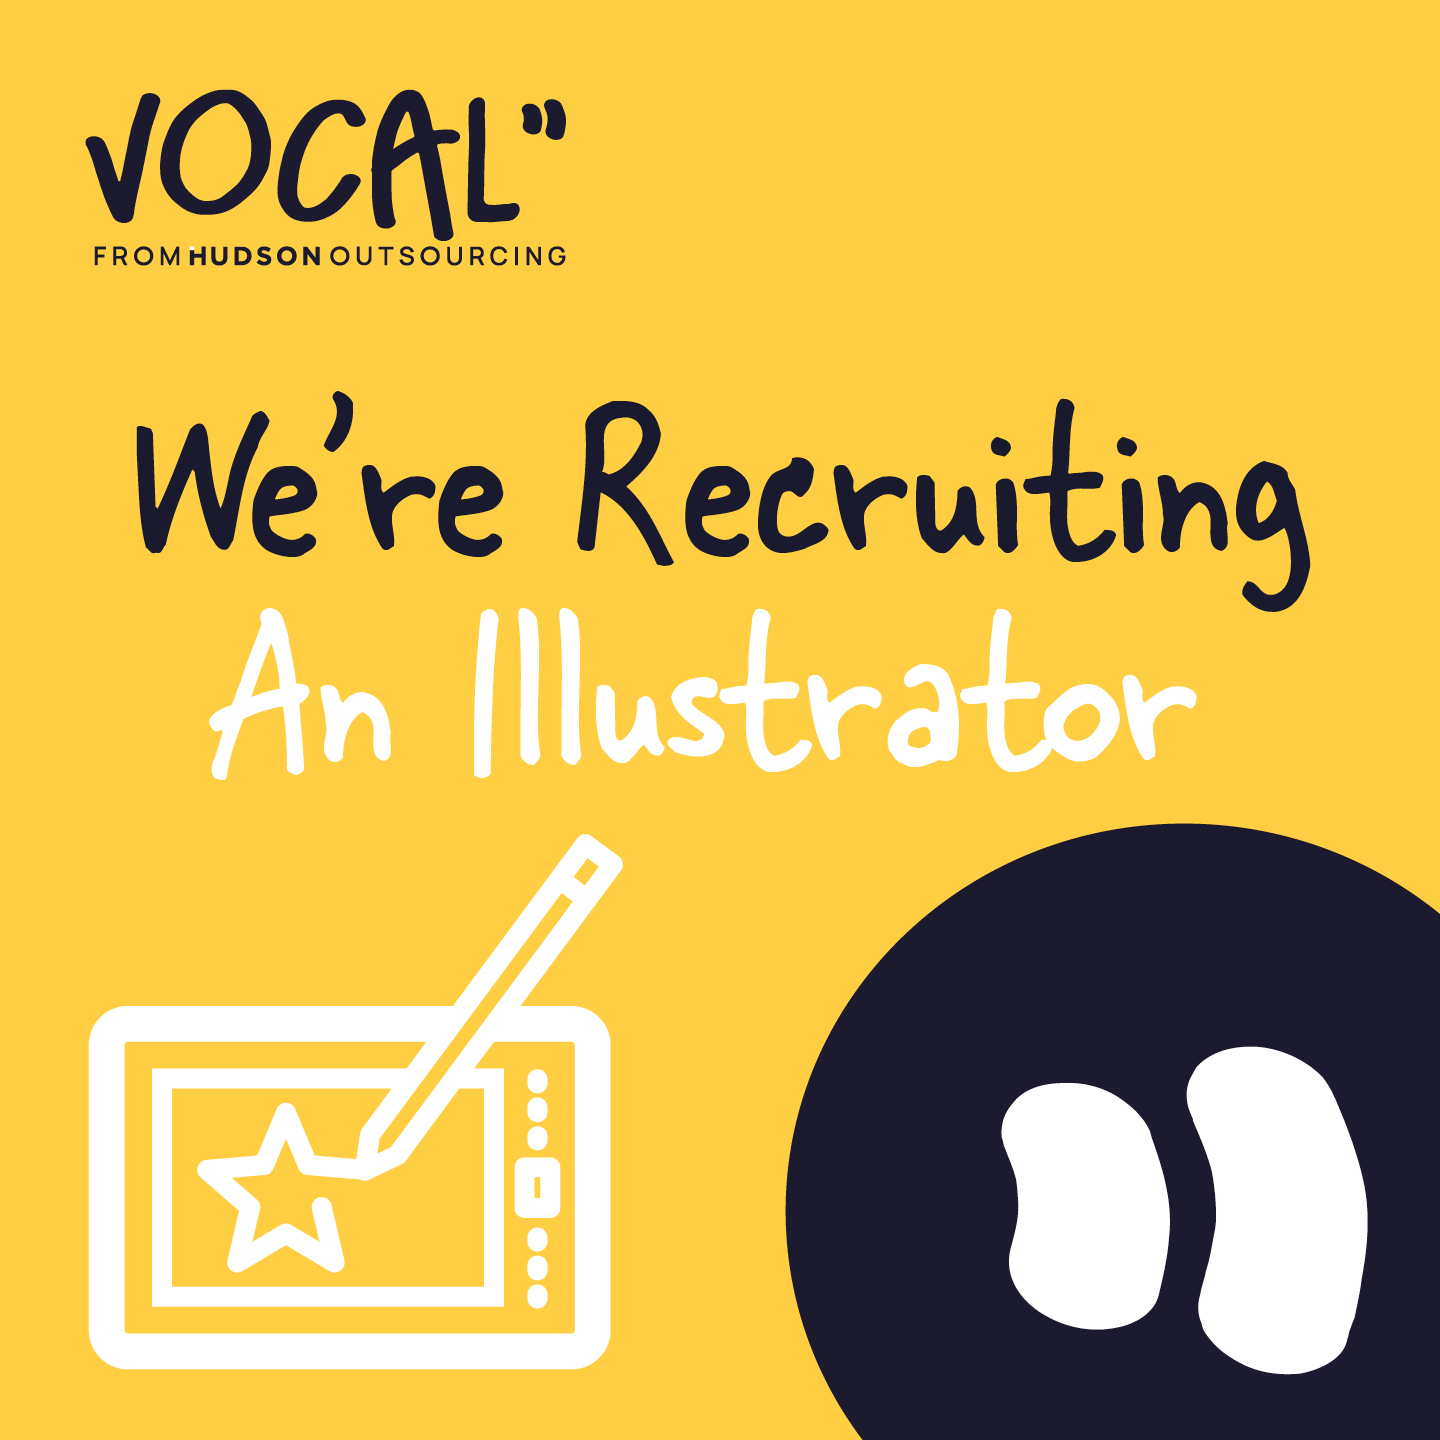 We’re Recruiting an Illustrator